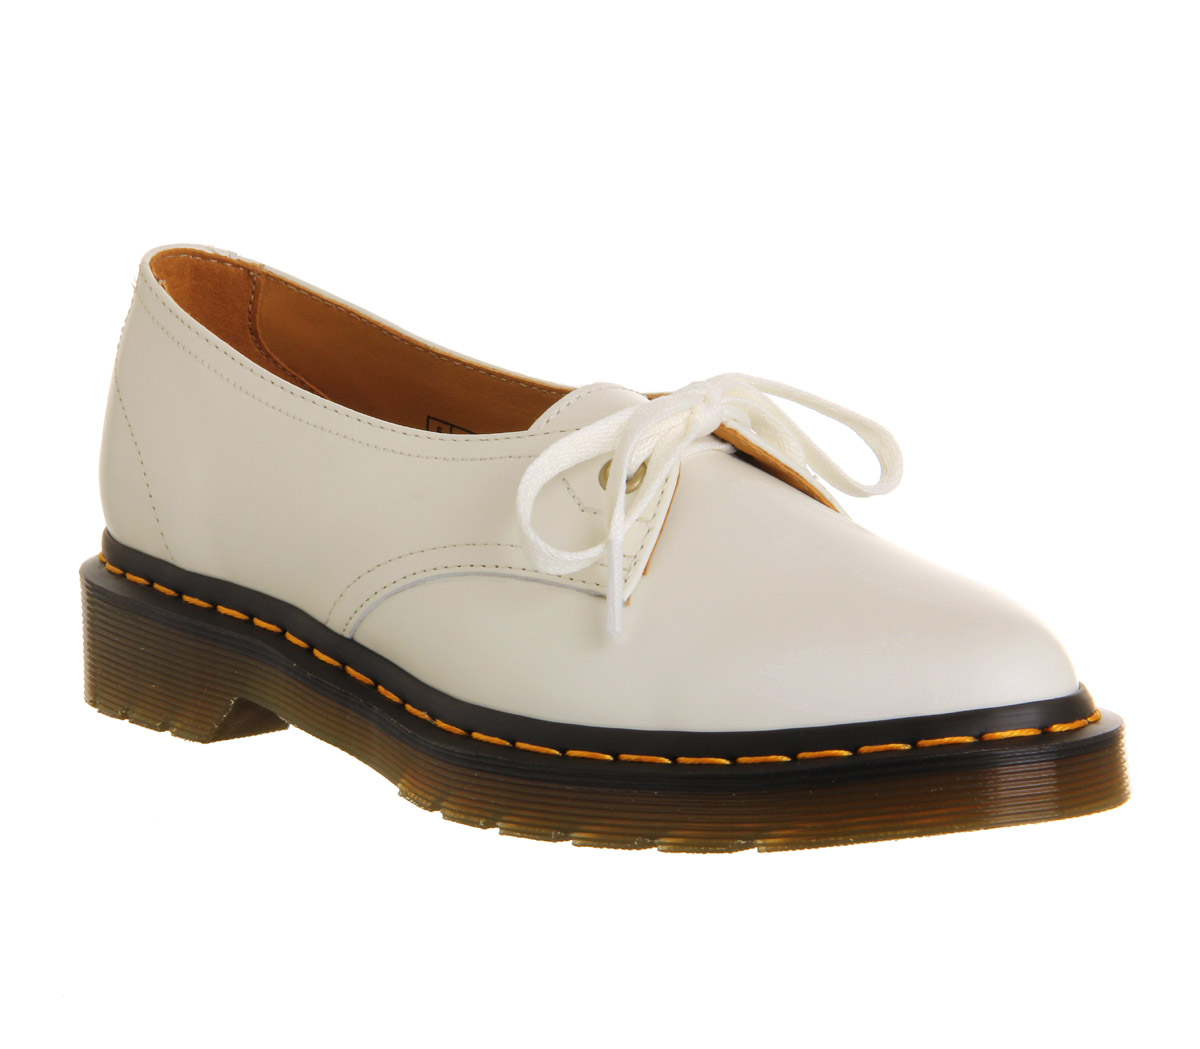 Dr. MartensCore Siano ShoeOff White Polished Leather